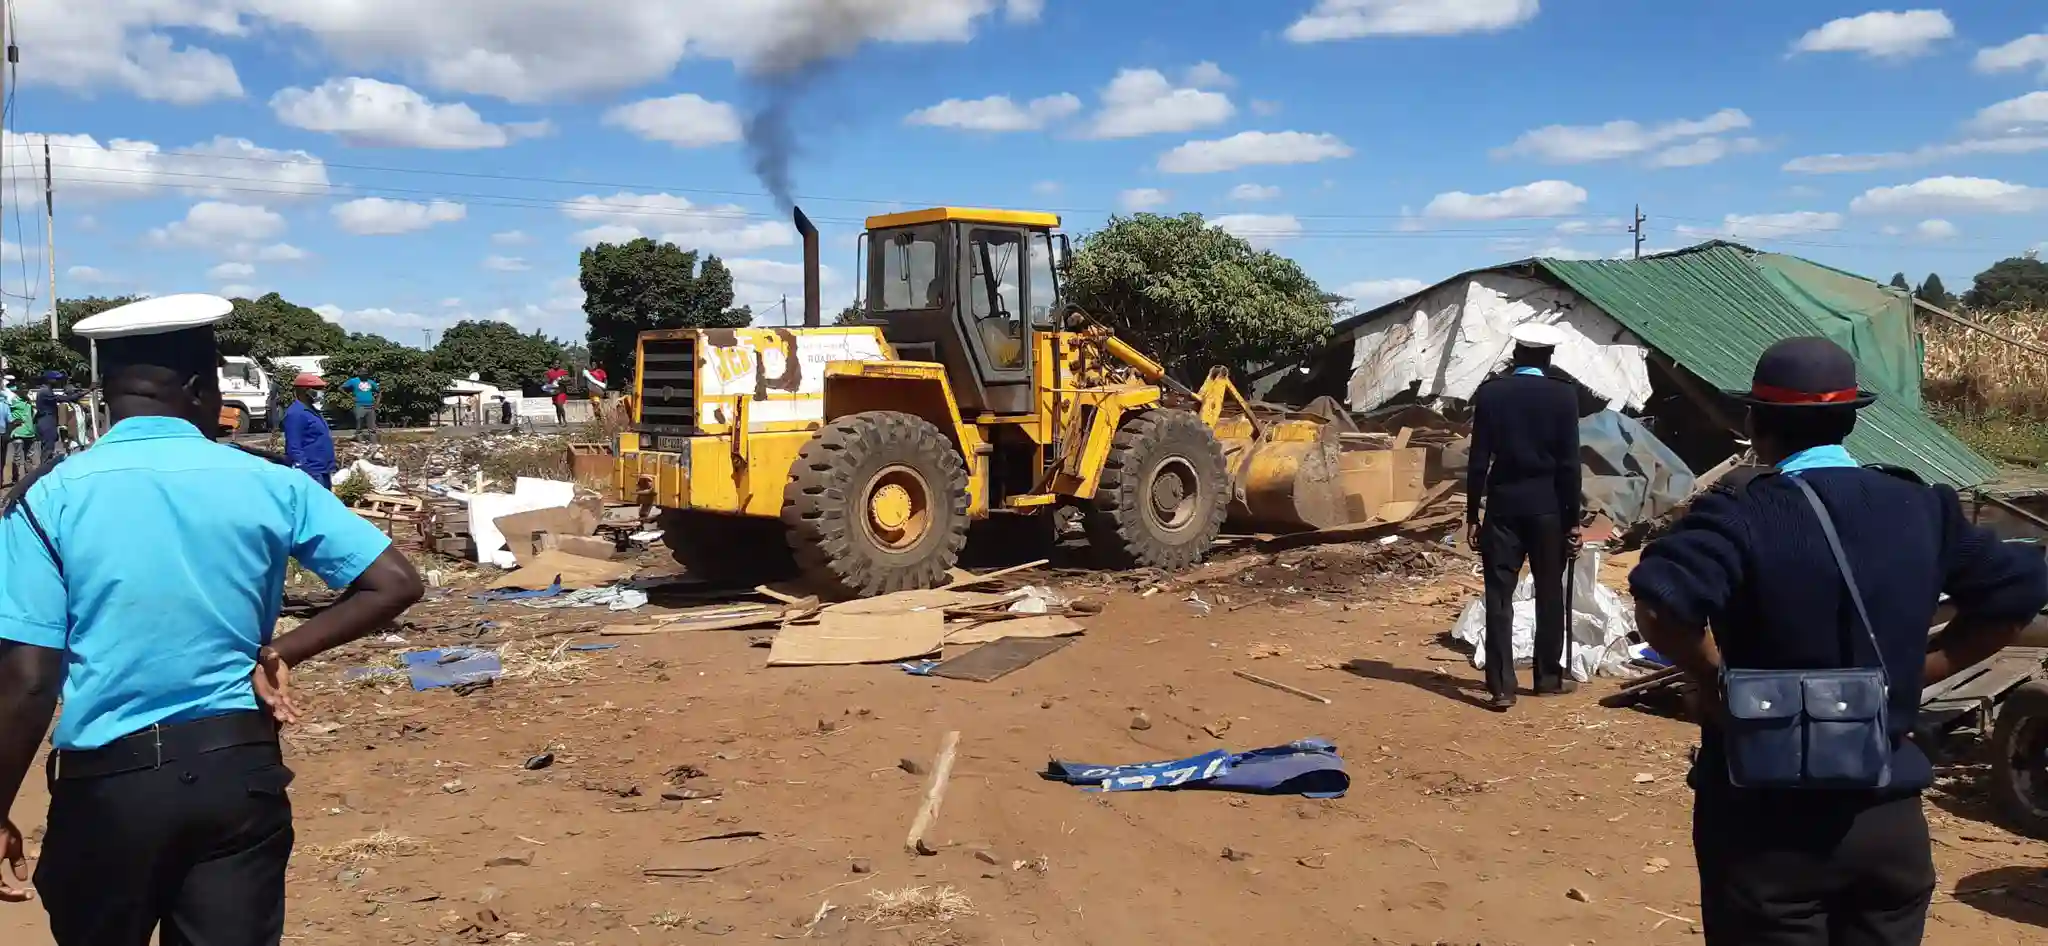 Heavy Fines For Illegal Structures And Unapproved Plans- Council